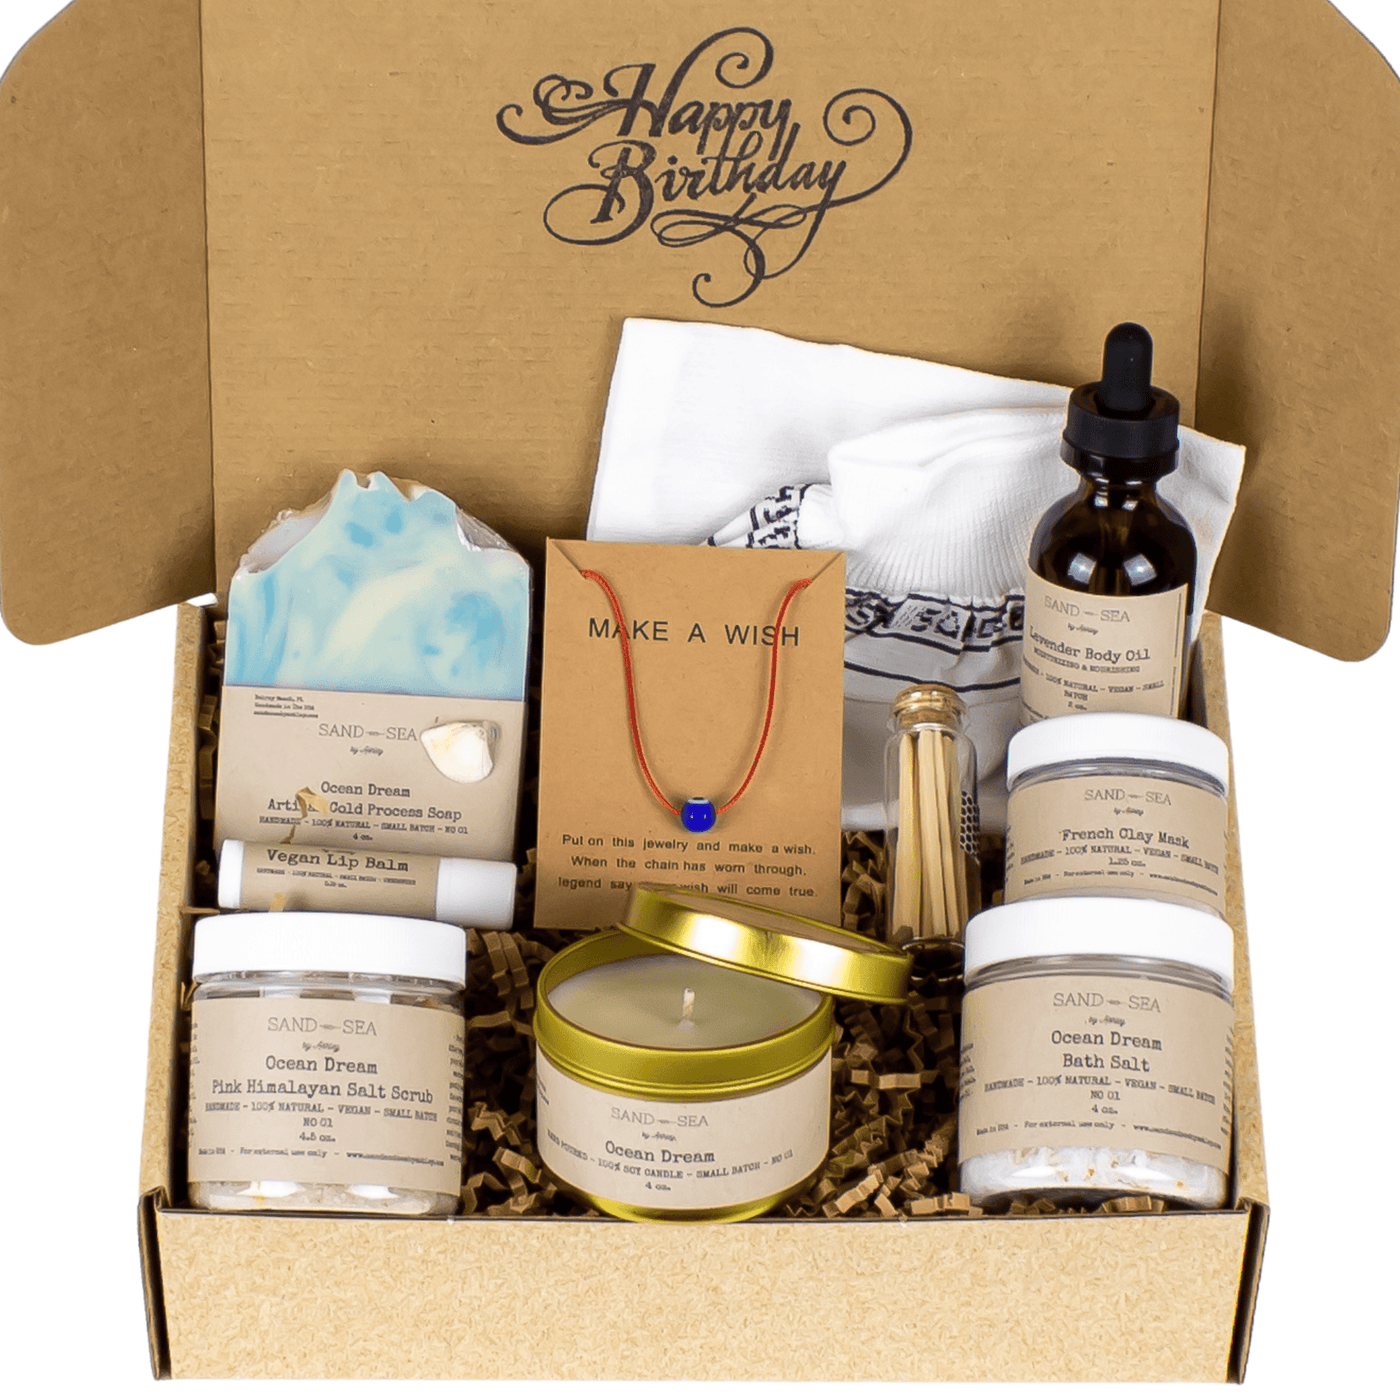 The Best Holiday Gift Ideas for Her This Year - Make Her Feel Pampered